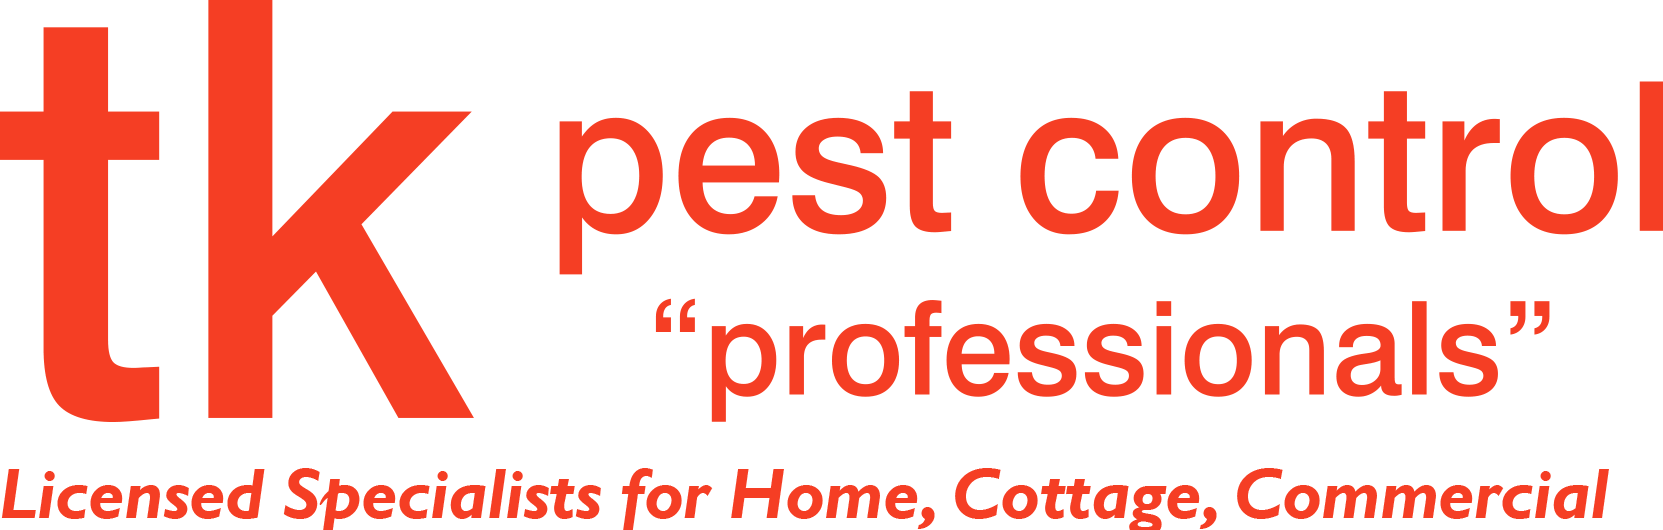 Back Home - T K Pest Control (1663x530), Png Download